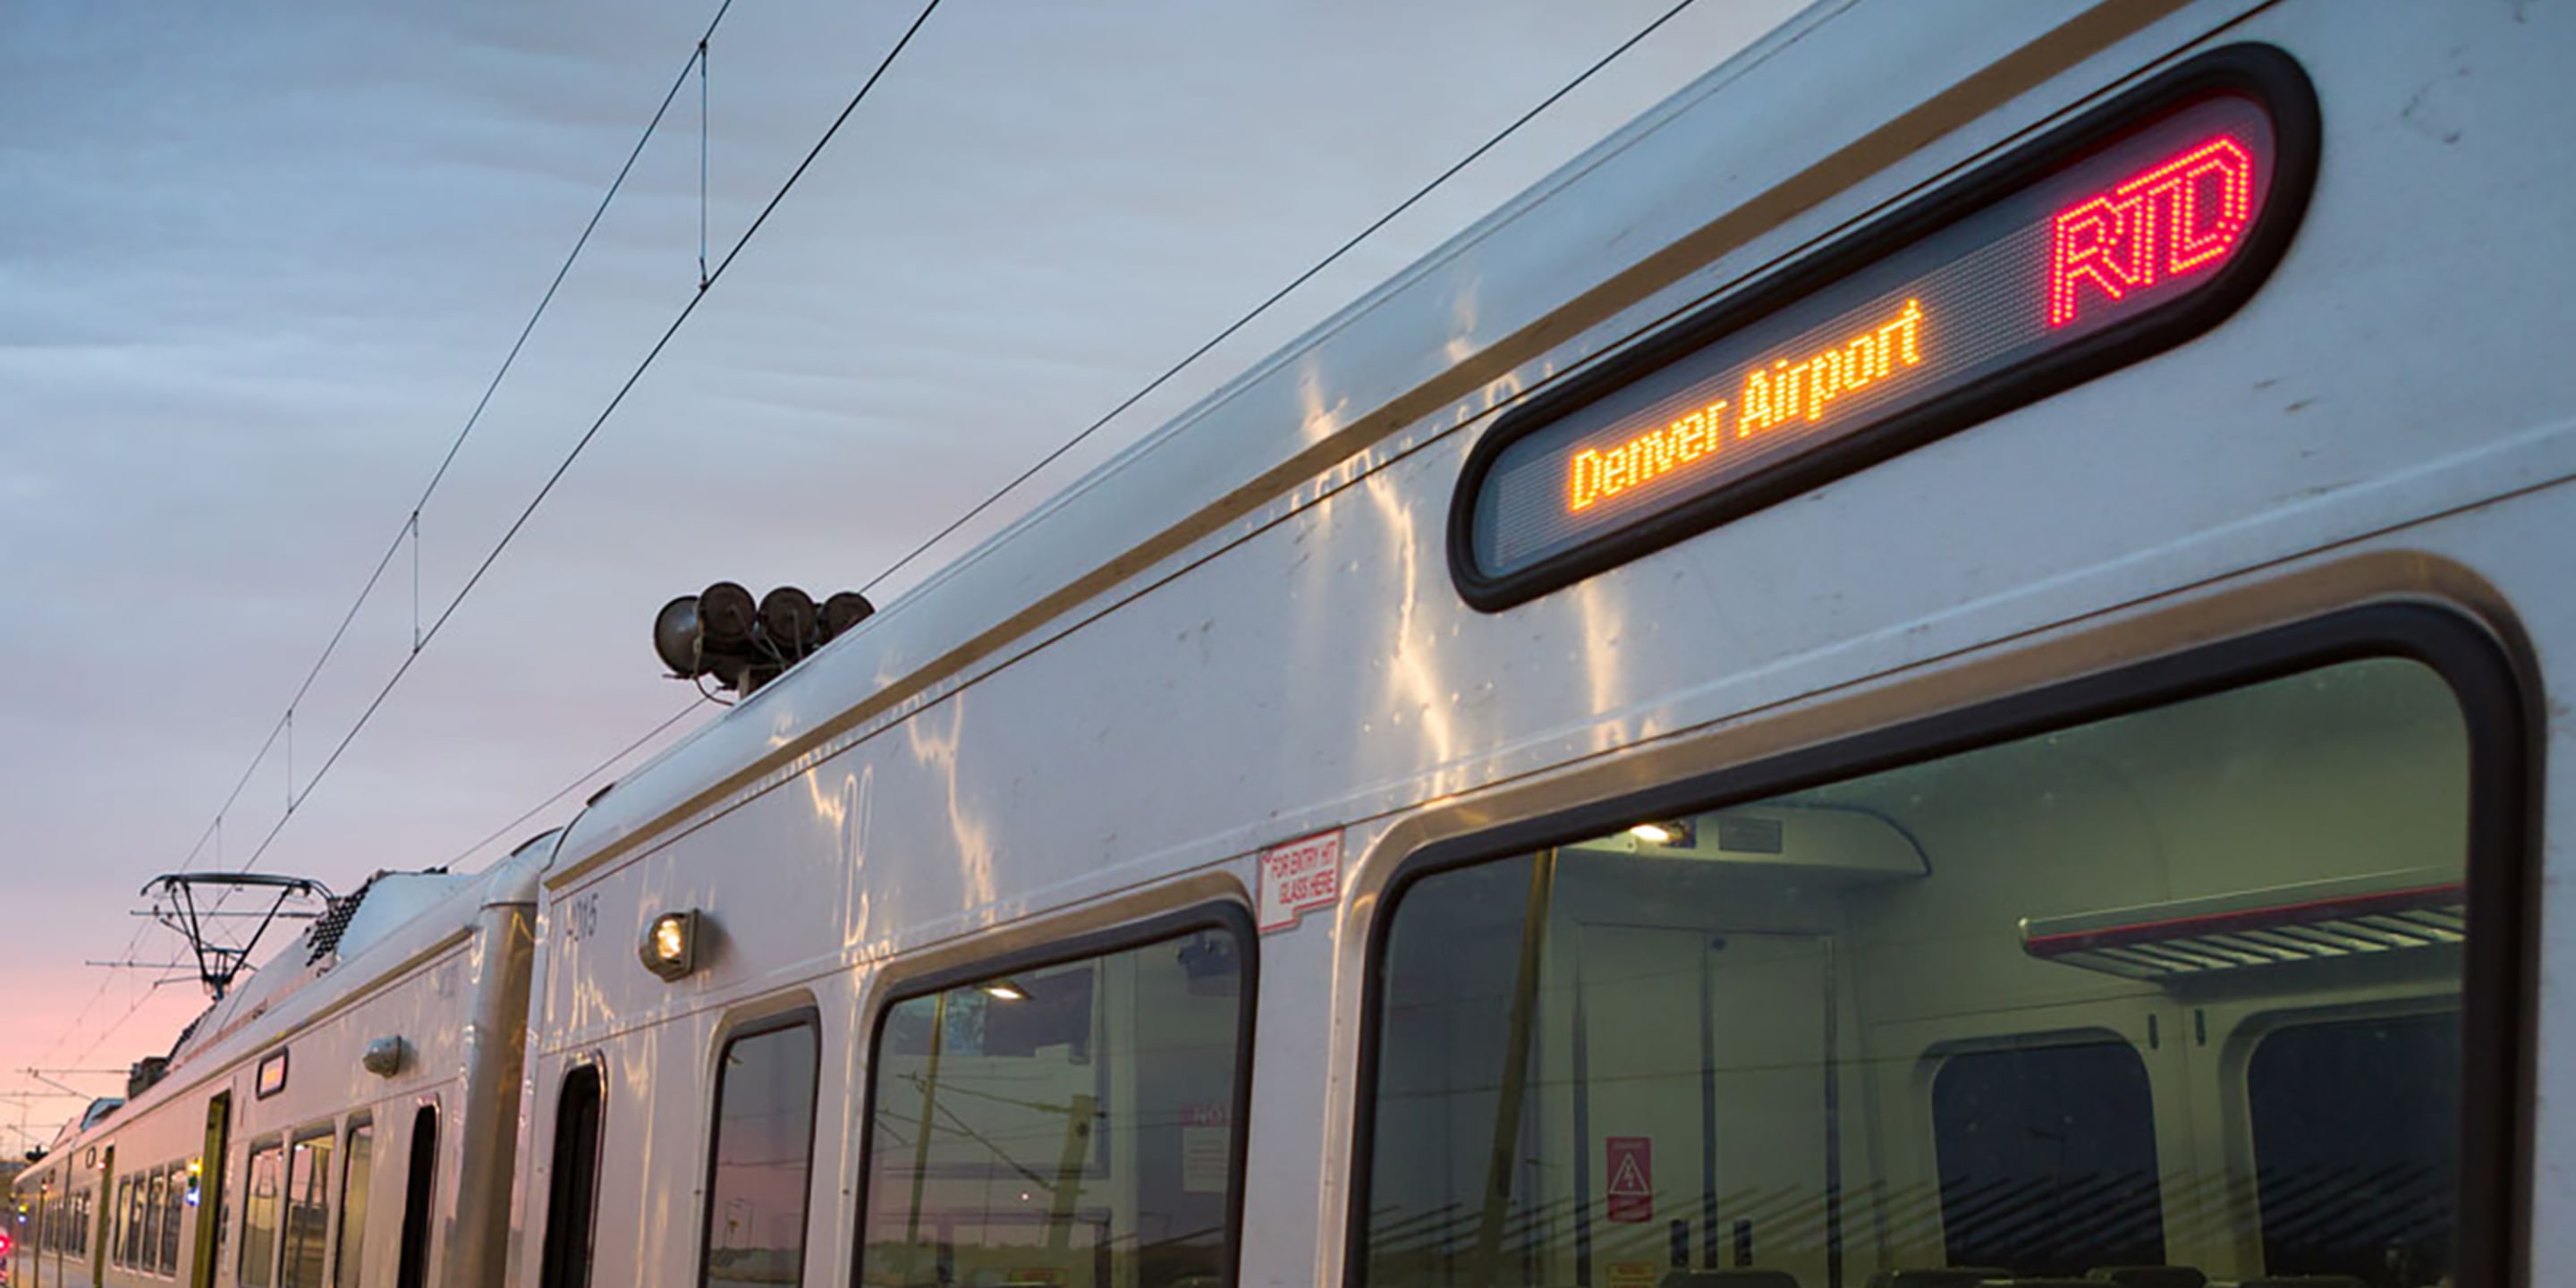 Photo of the A-Line towards Denver Airport